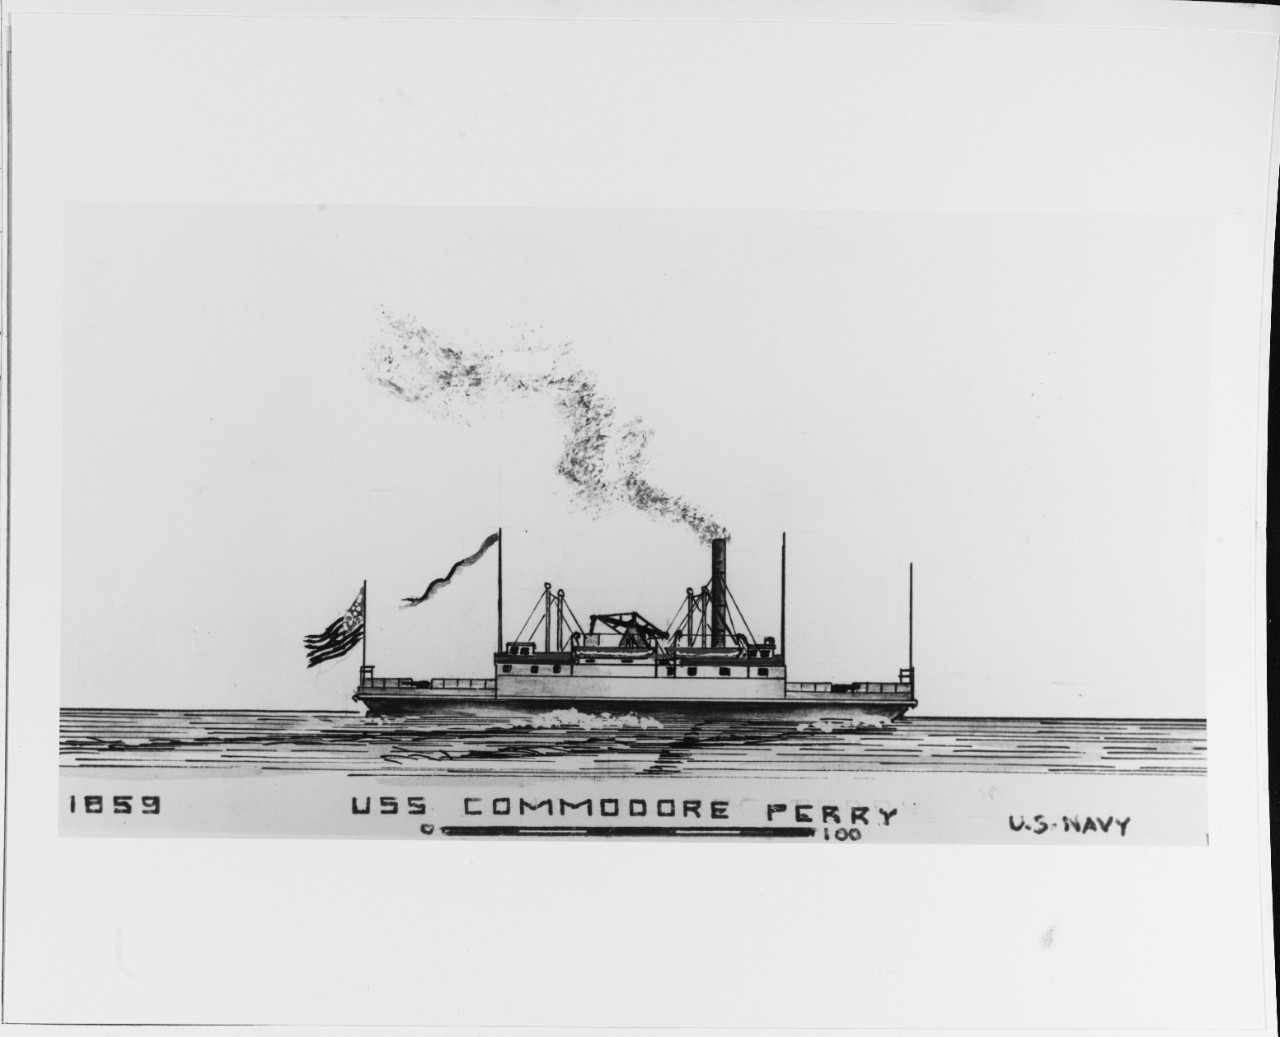 COMMODORE PERRY (naval and merchant steamer, 1859-1907)